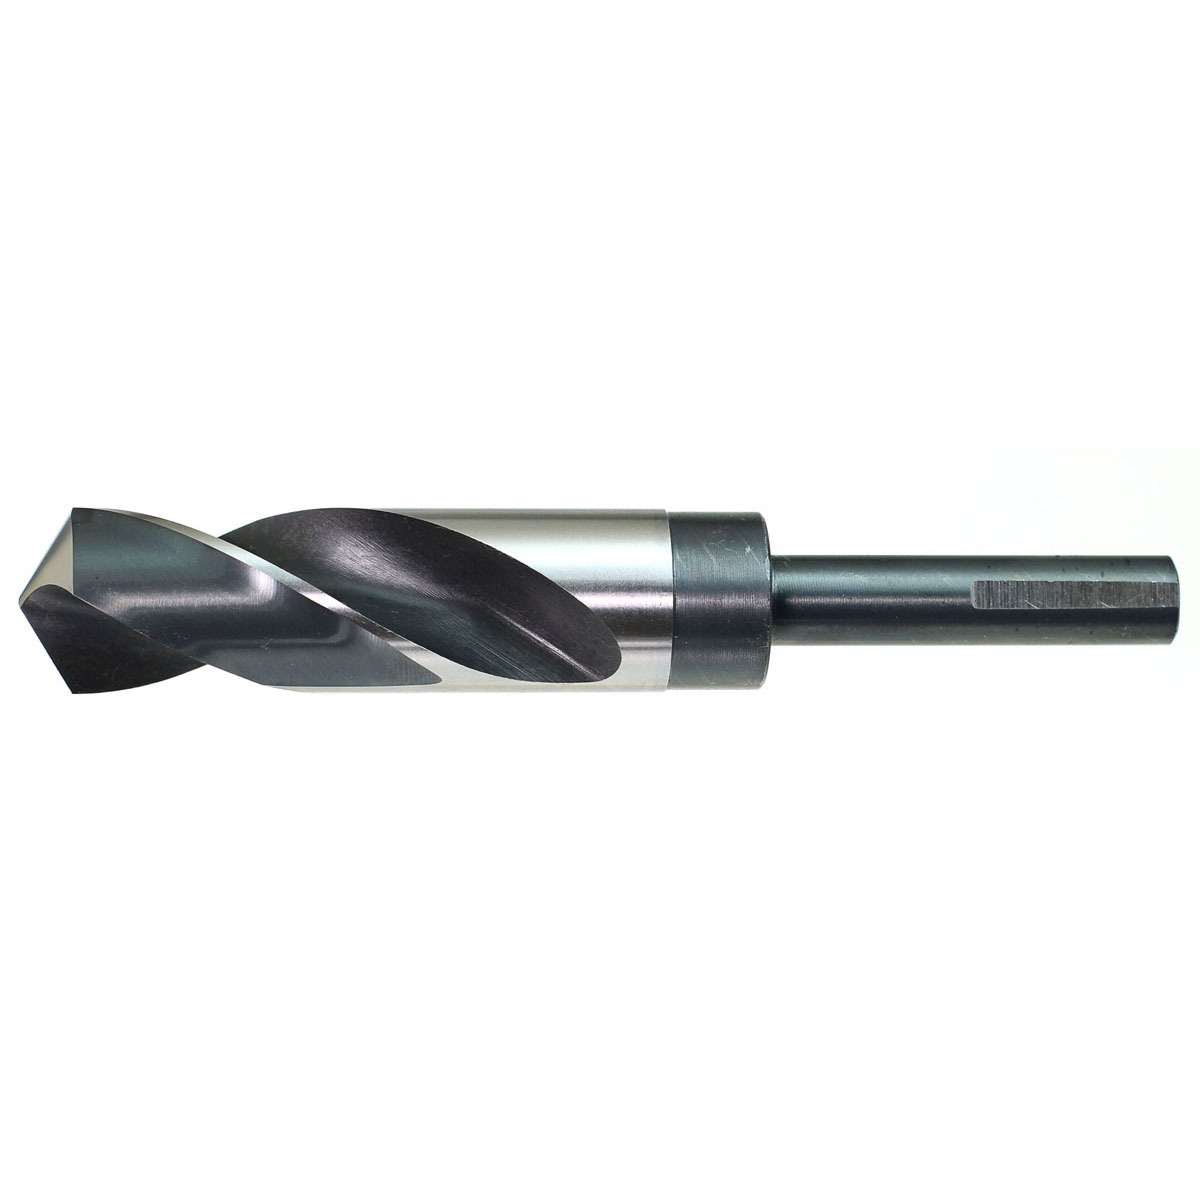 1/2" Reduced Shank Drill Bit Ridgid Your Choice of 1 or 5 Bits 